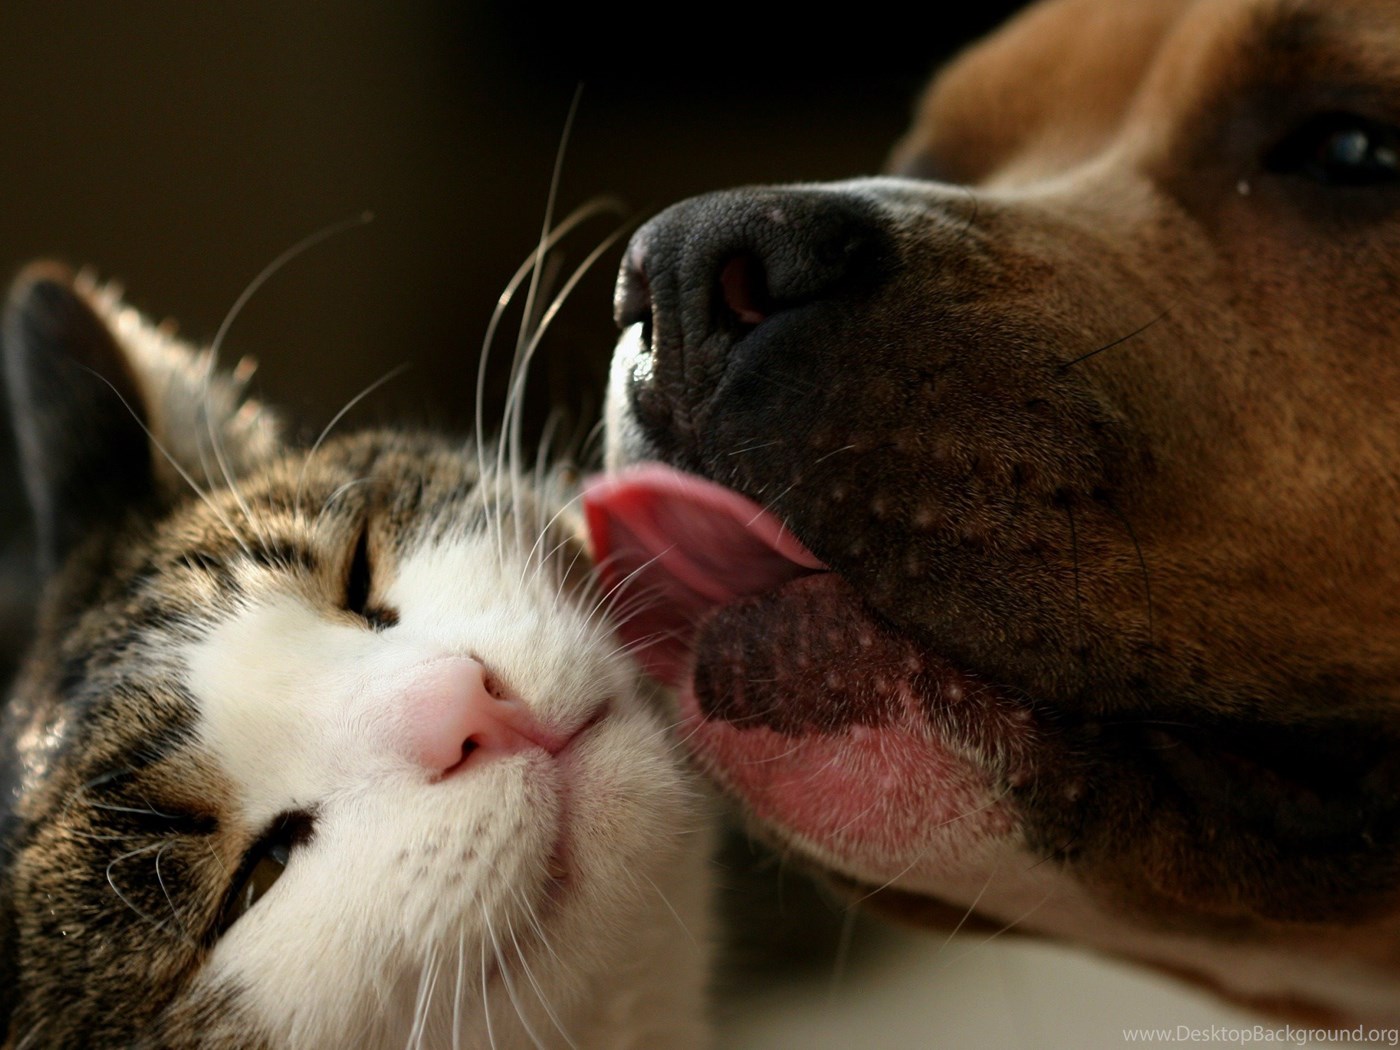 Unbelievable Love Cats And Dogs 4k Wallpapers Desktop Background Images, Photos, Reviews